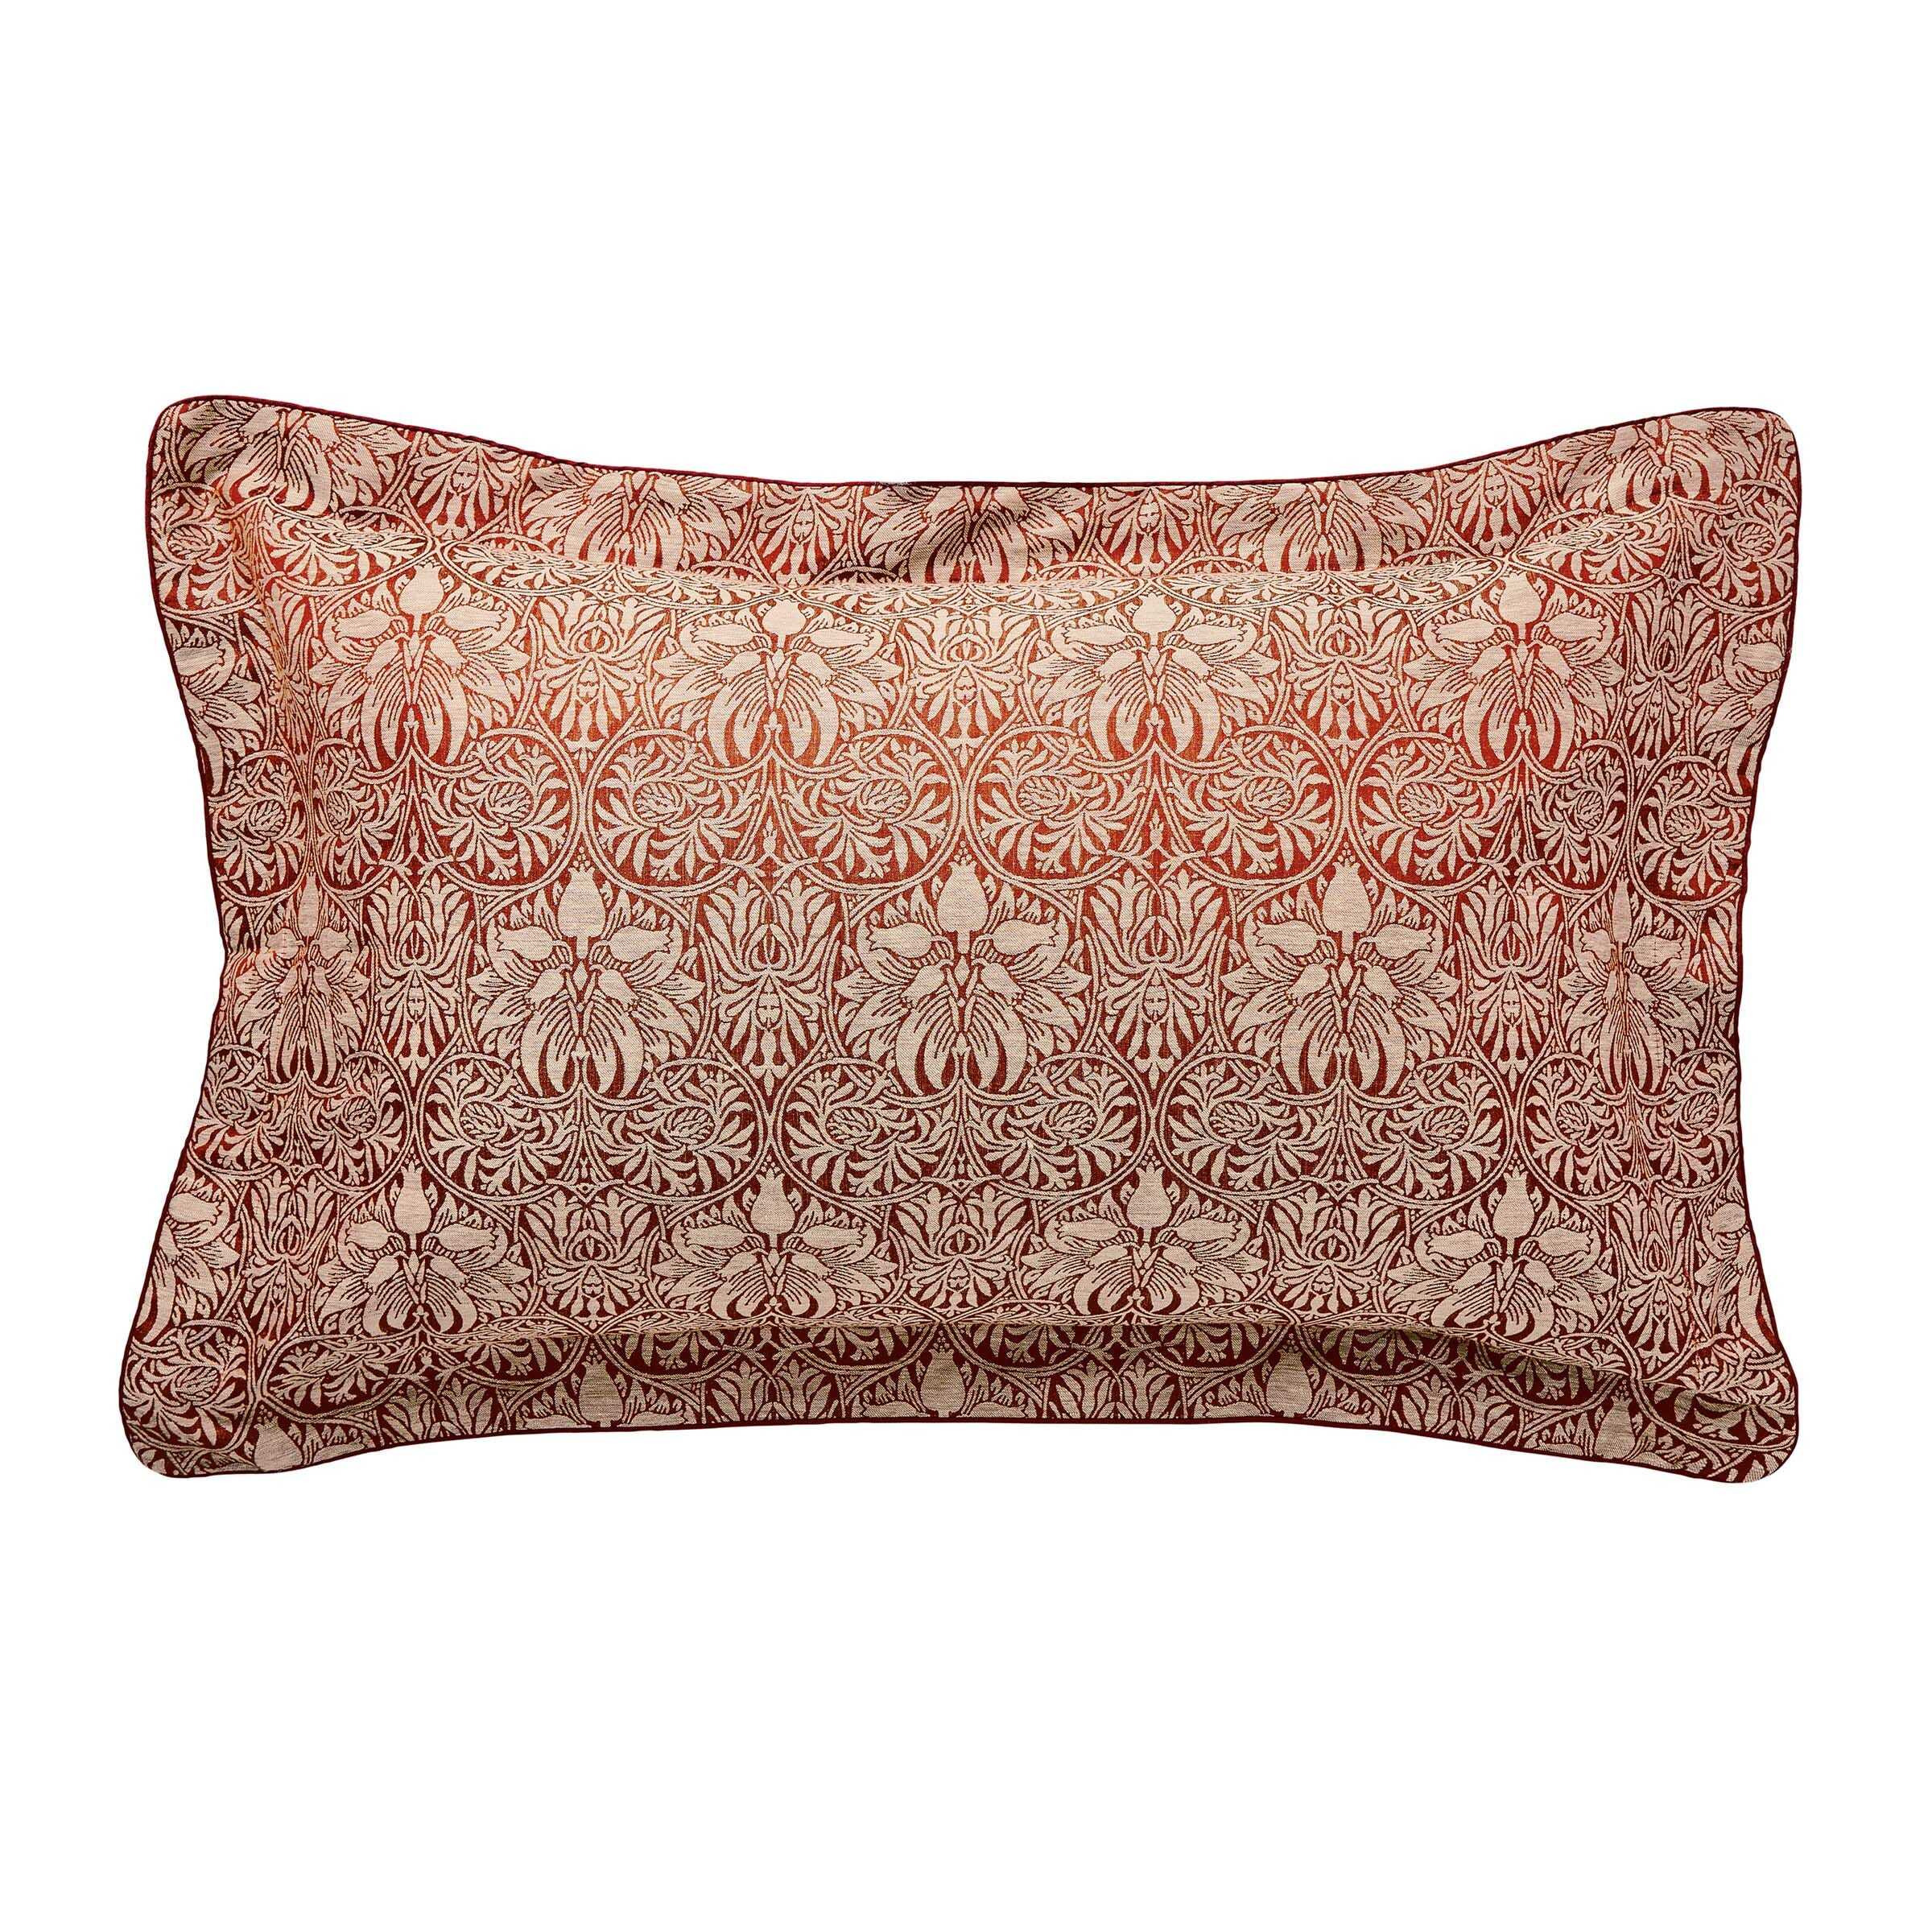 William Morris Crown Imperial Oxford Pillowcase, Red - image 1